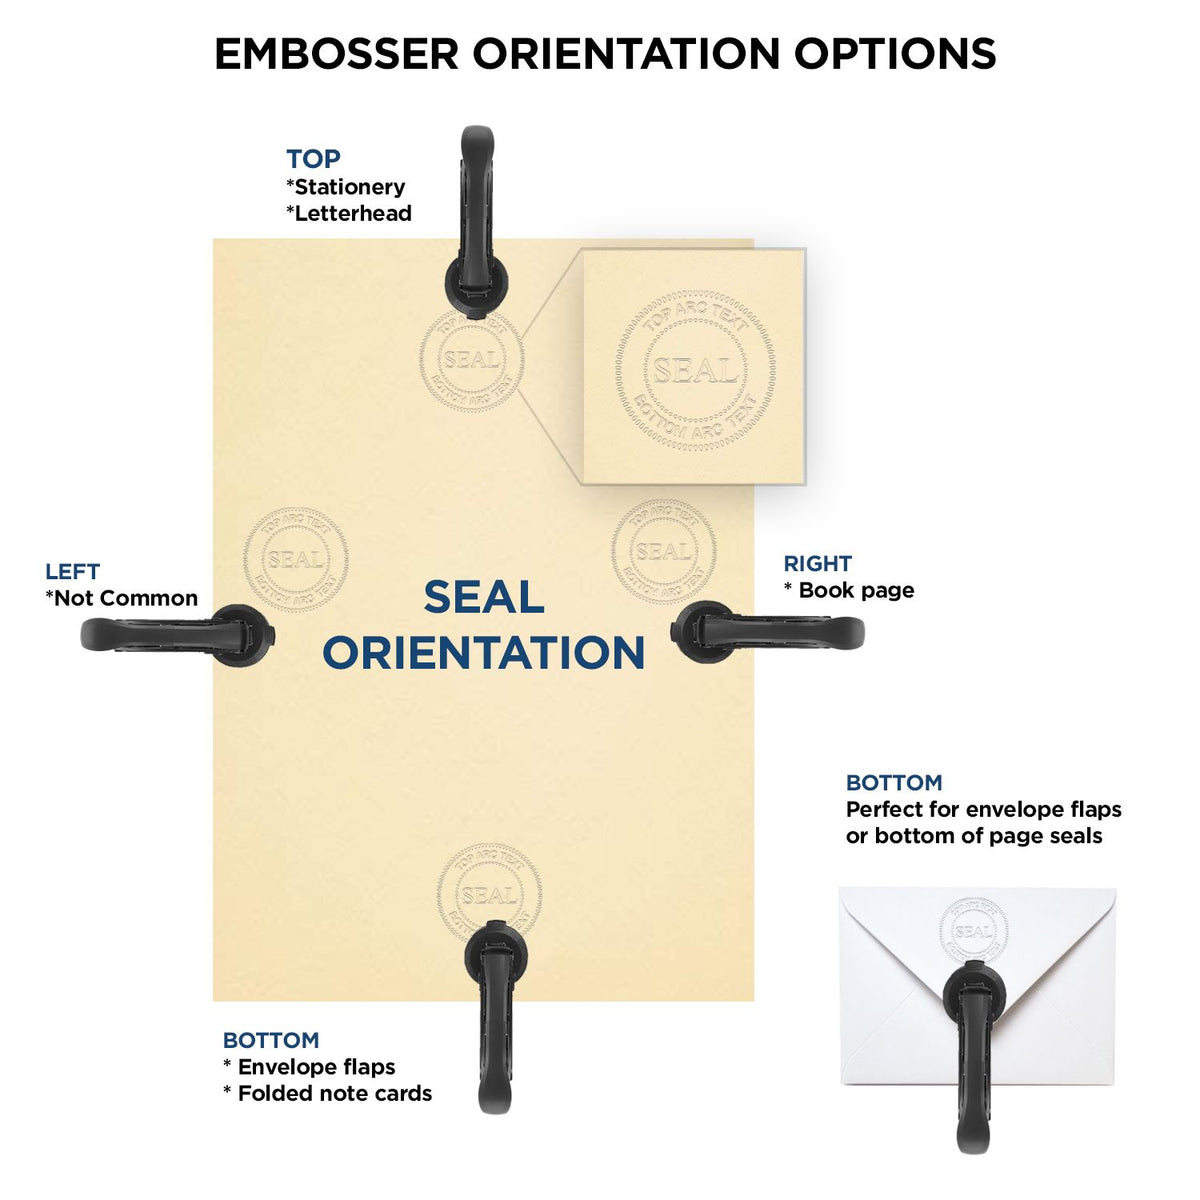 An infographic for the Gift South Carolina Engineer Seal showing embosser orientation, this is showing examples of a top, bottom, right and left insert.